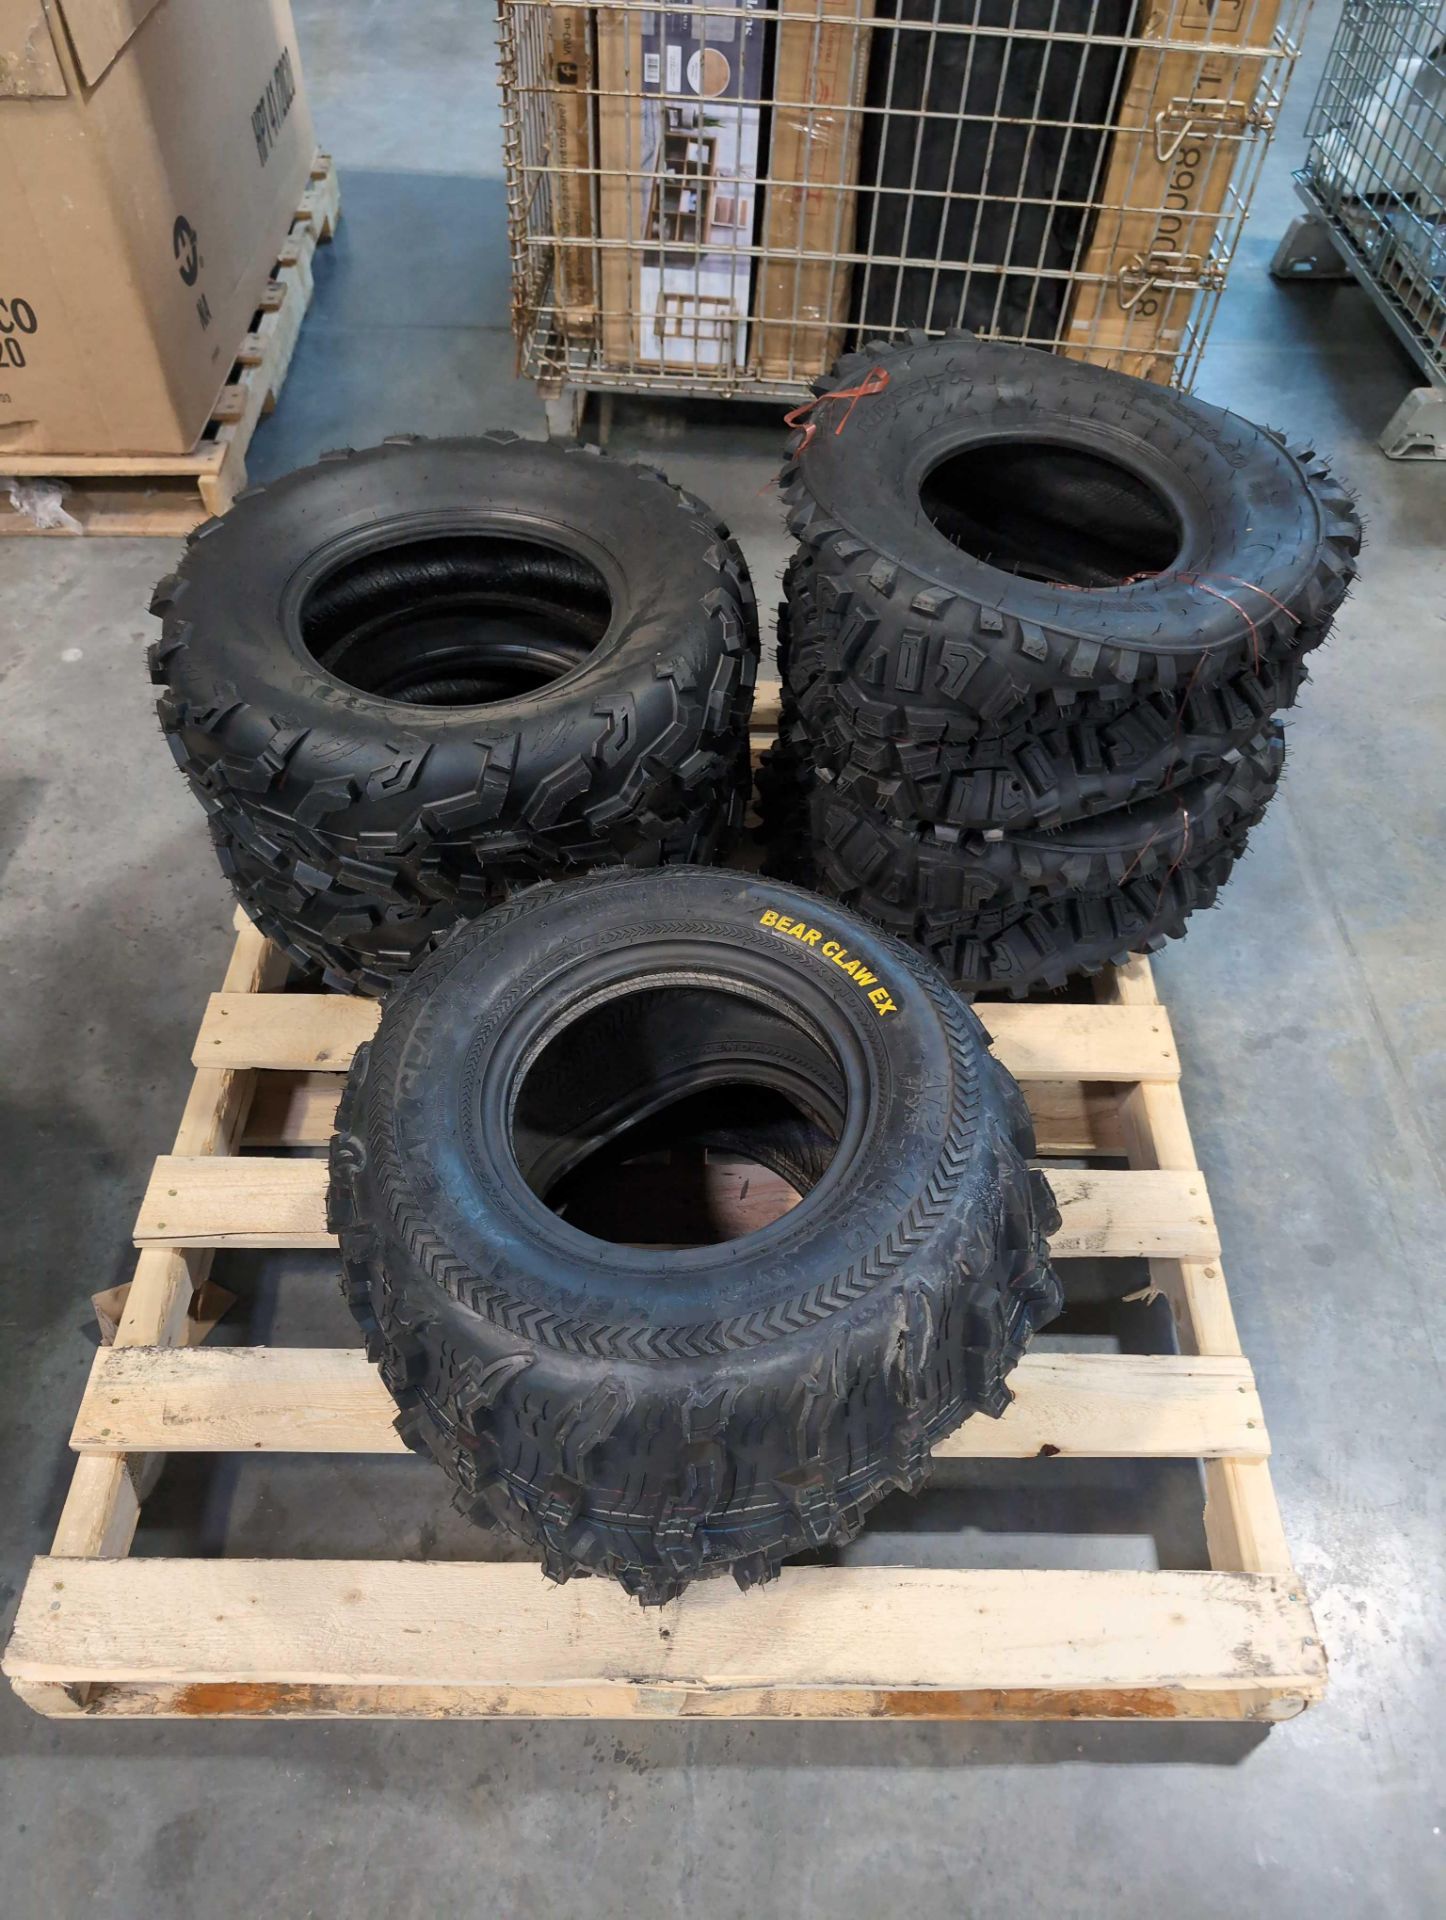 Tires: Bear Claw EX AT2 2x11-10, Halber AT25x8-12 and MASSFX AT 23x11-10